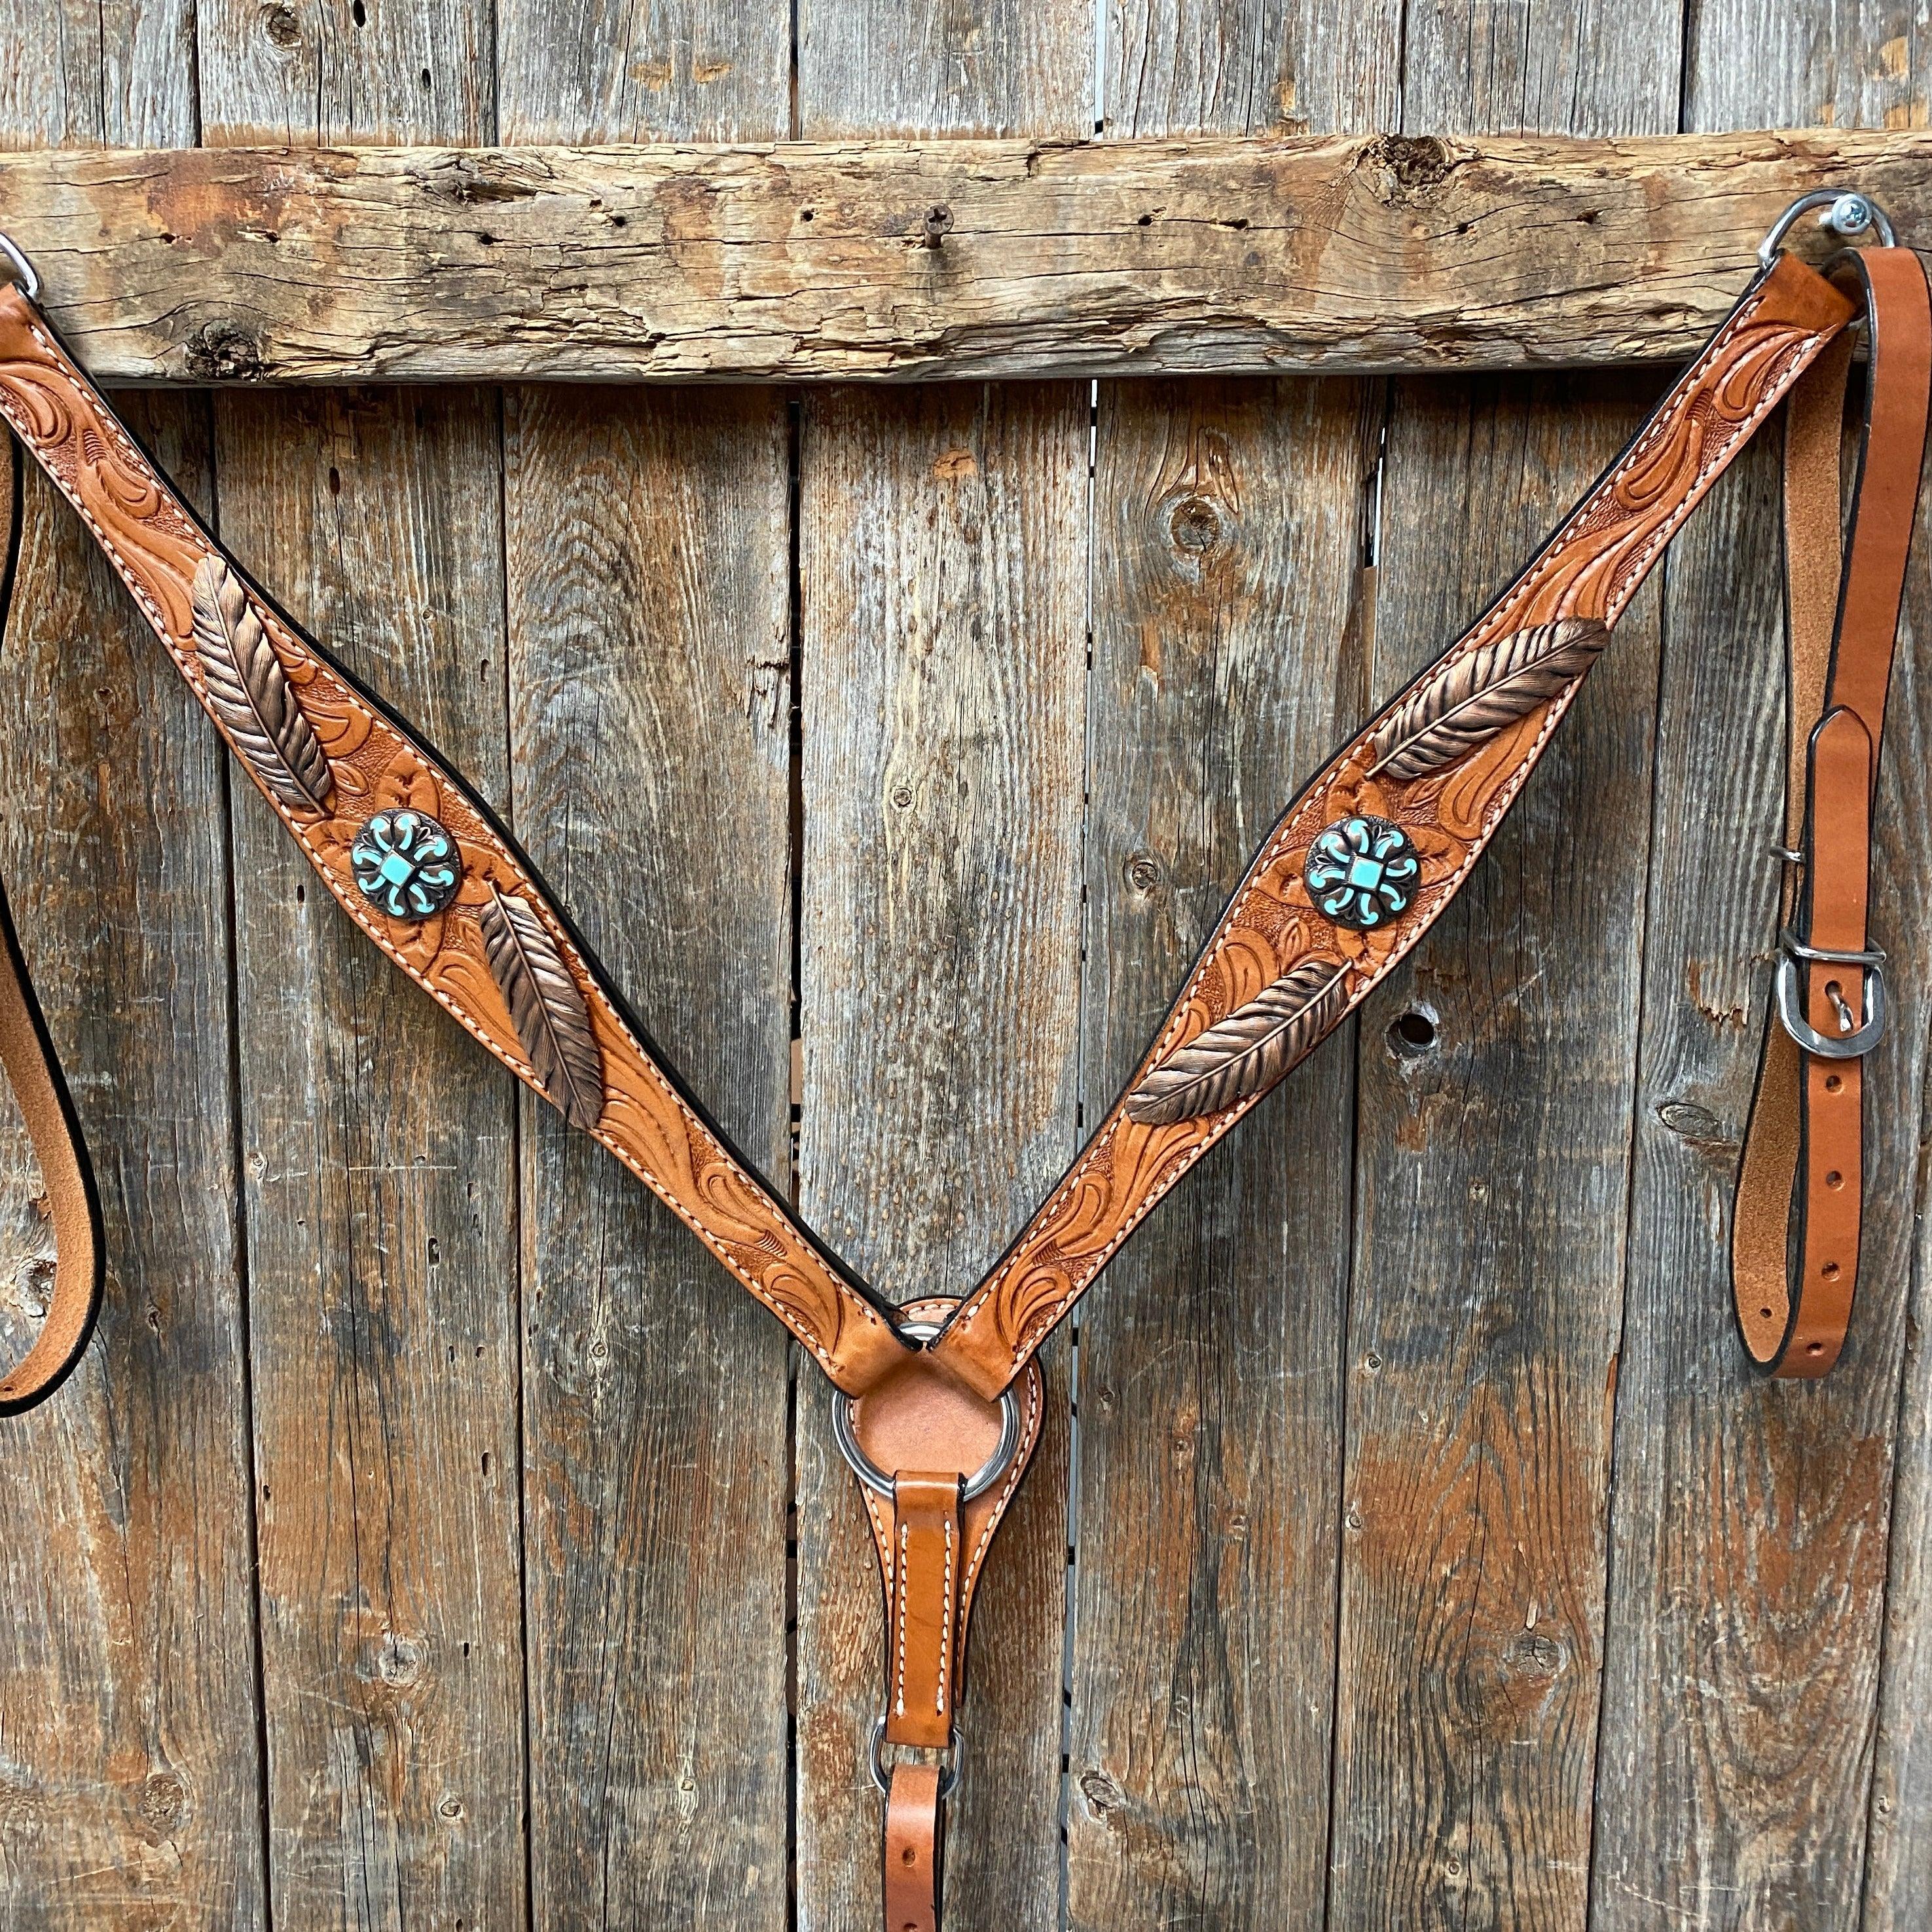 Light Oil V Brow Turquoise and Copper Browband & Breastcollar Tack Set #BBBC443 - RODEO DRIVE